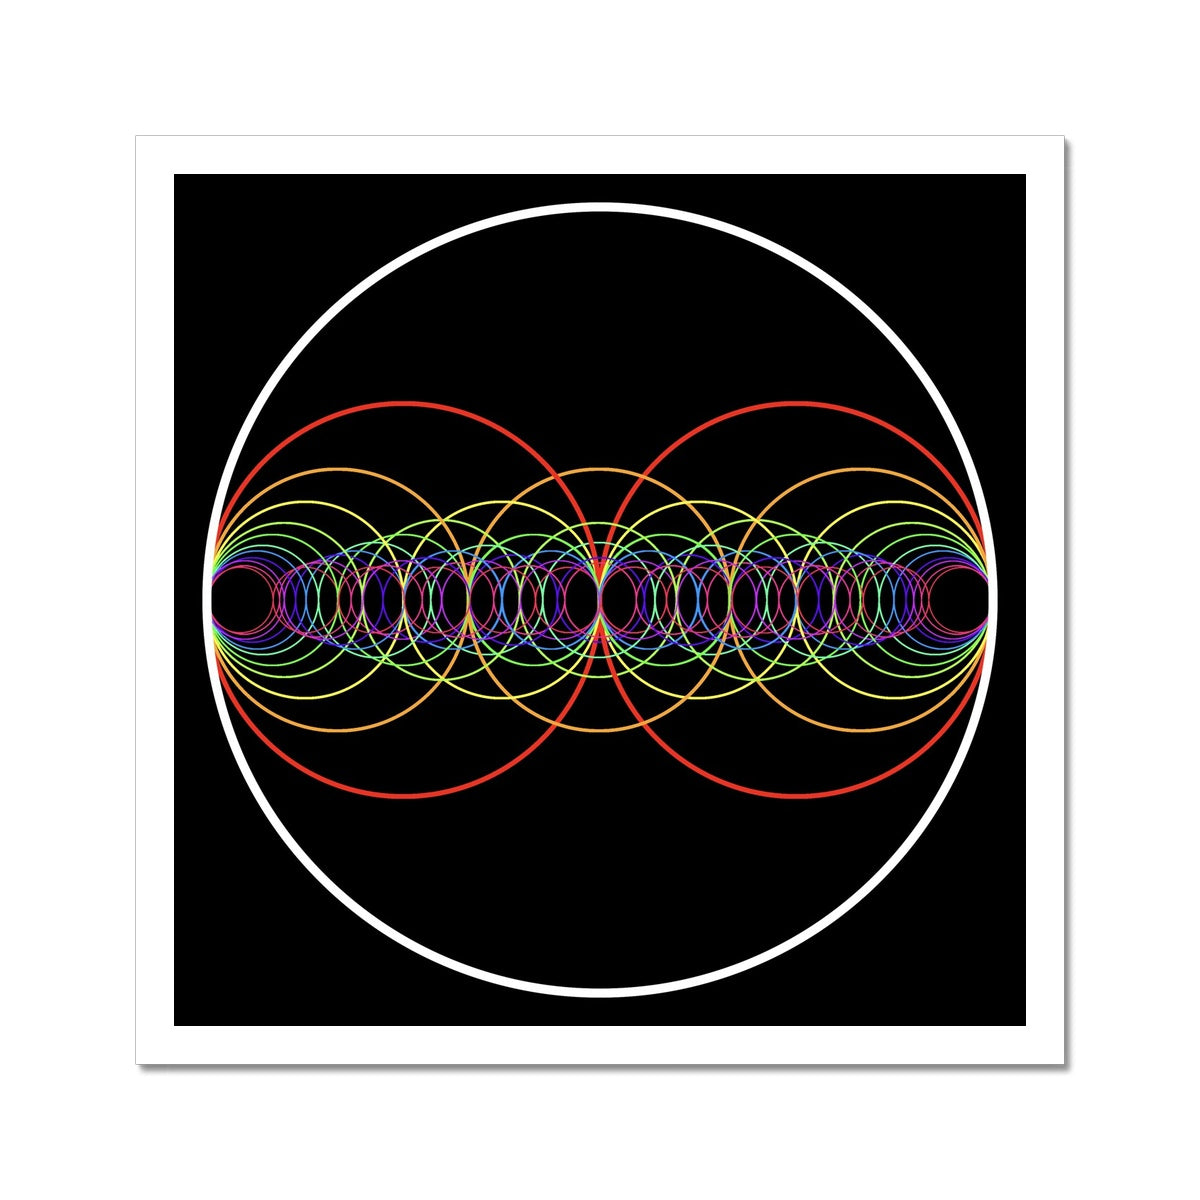 Complete Sound Waves in a Circle C-Type Print